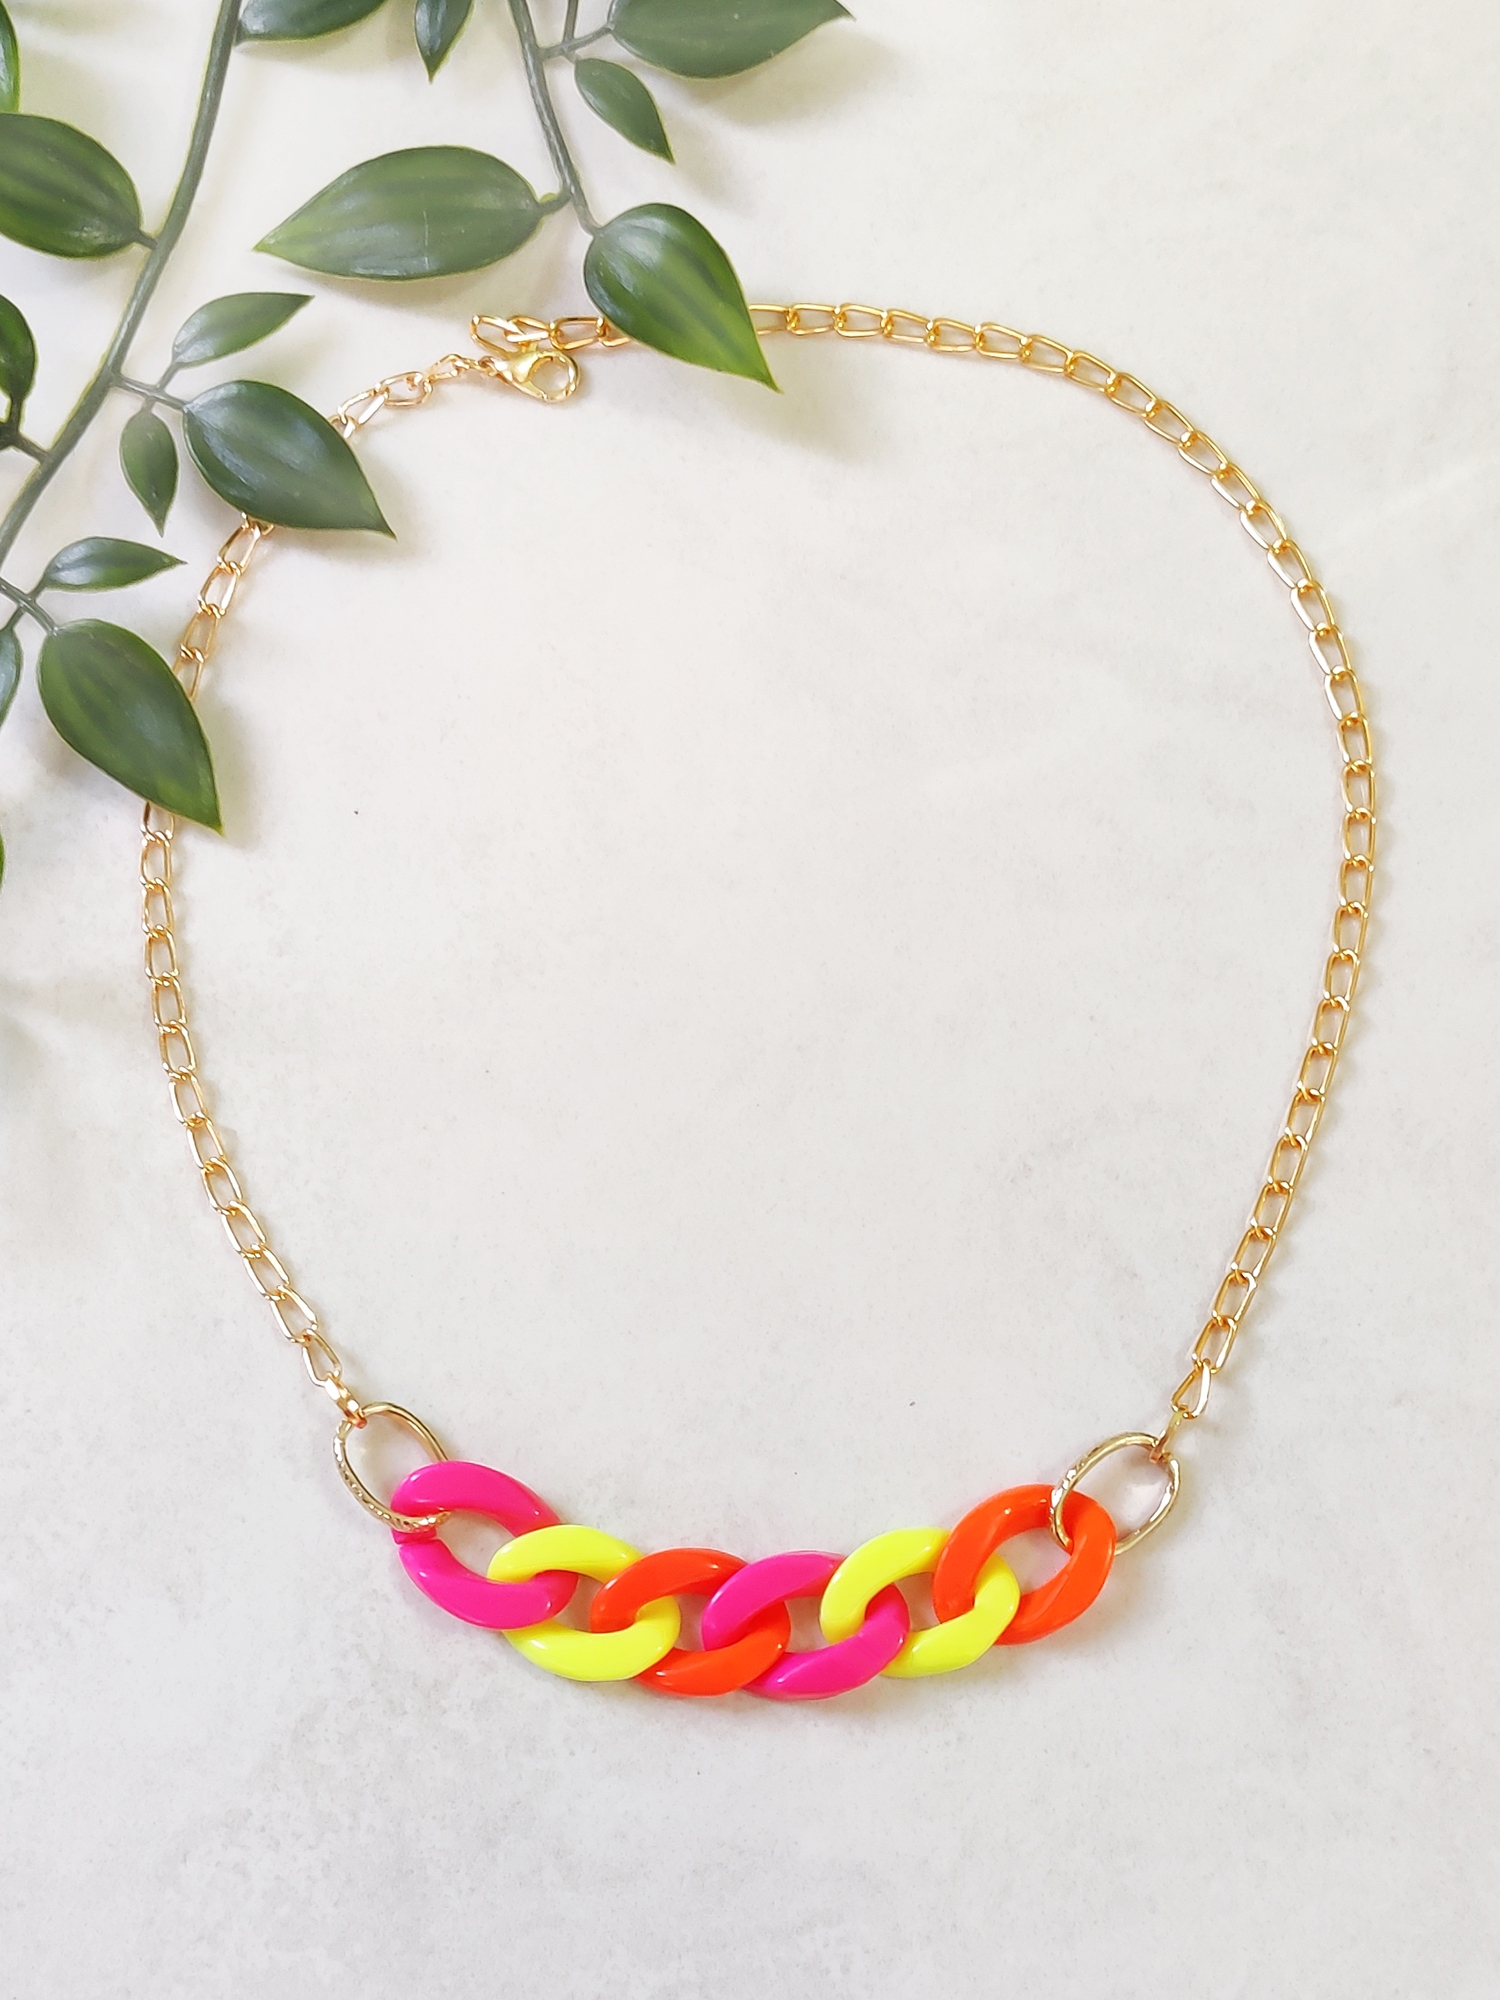 Neon Link Chain Necklace